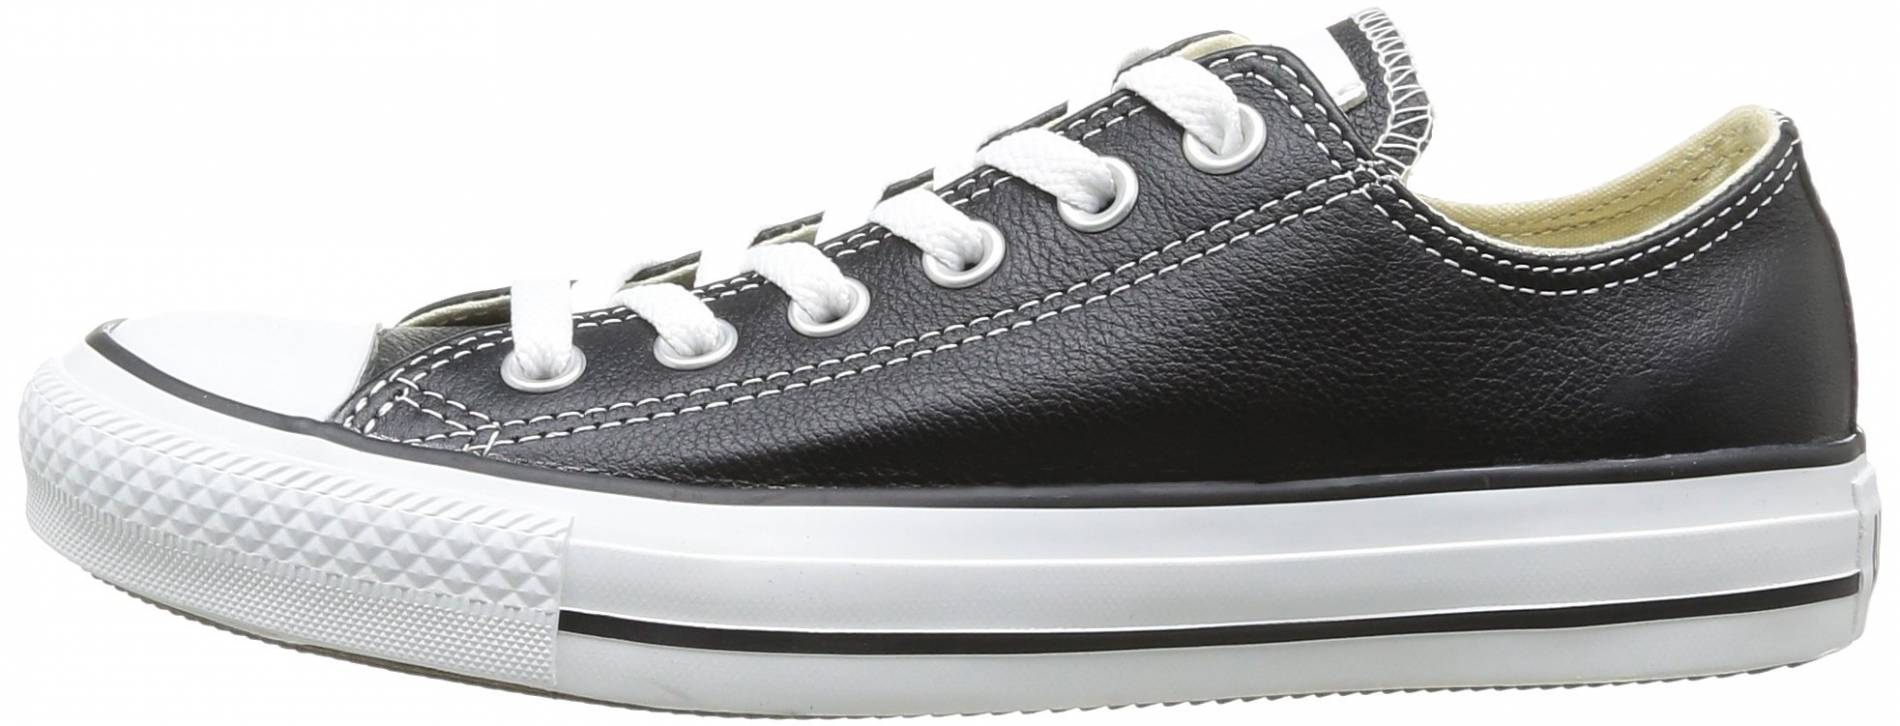 converse black leather sneakers